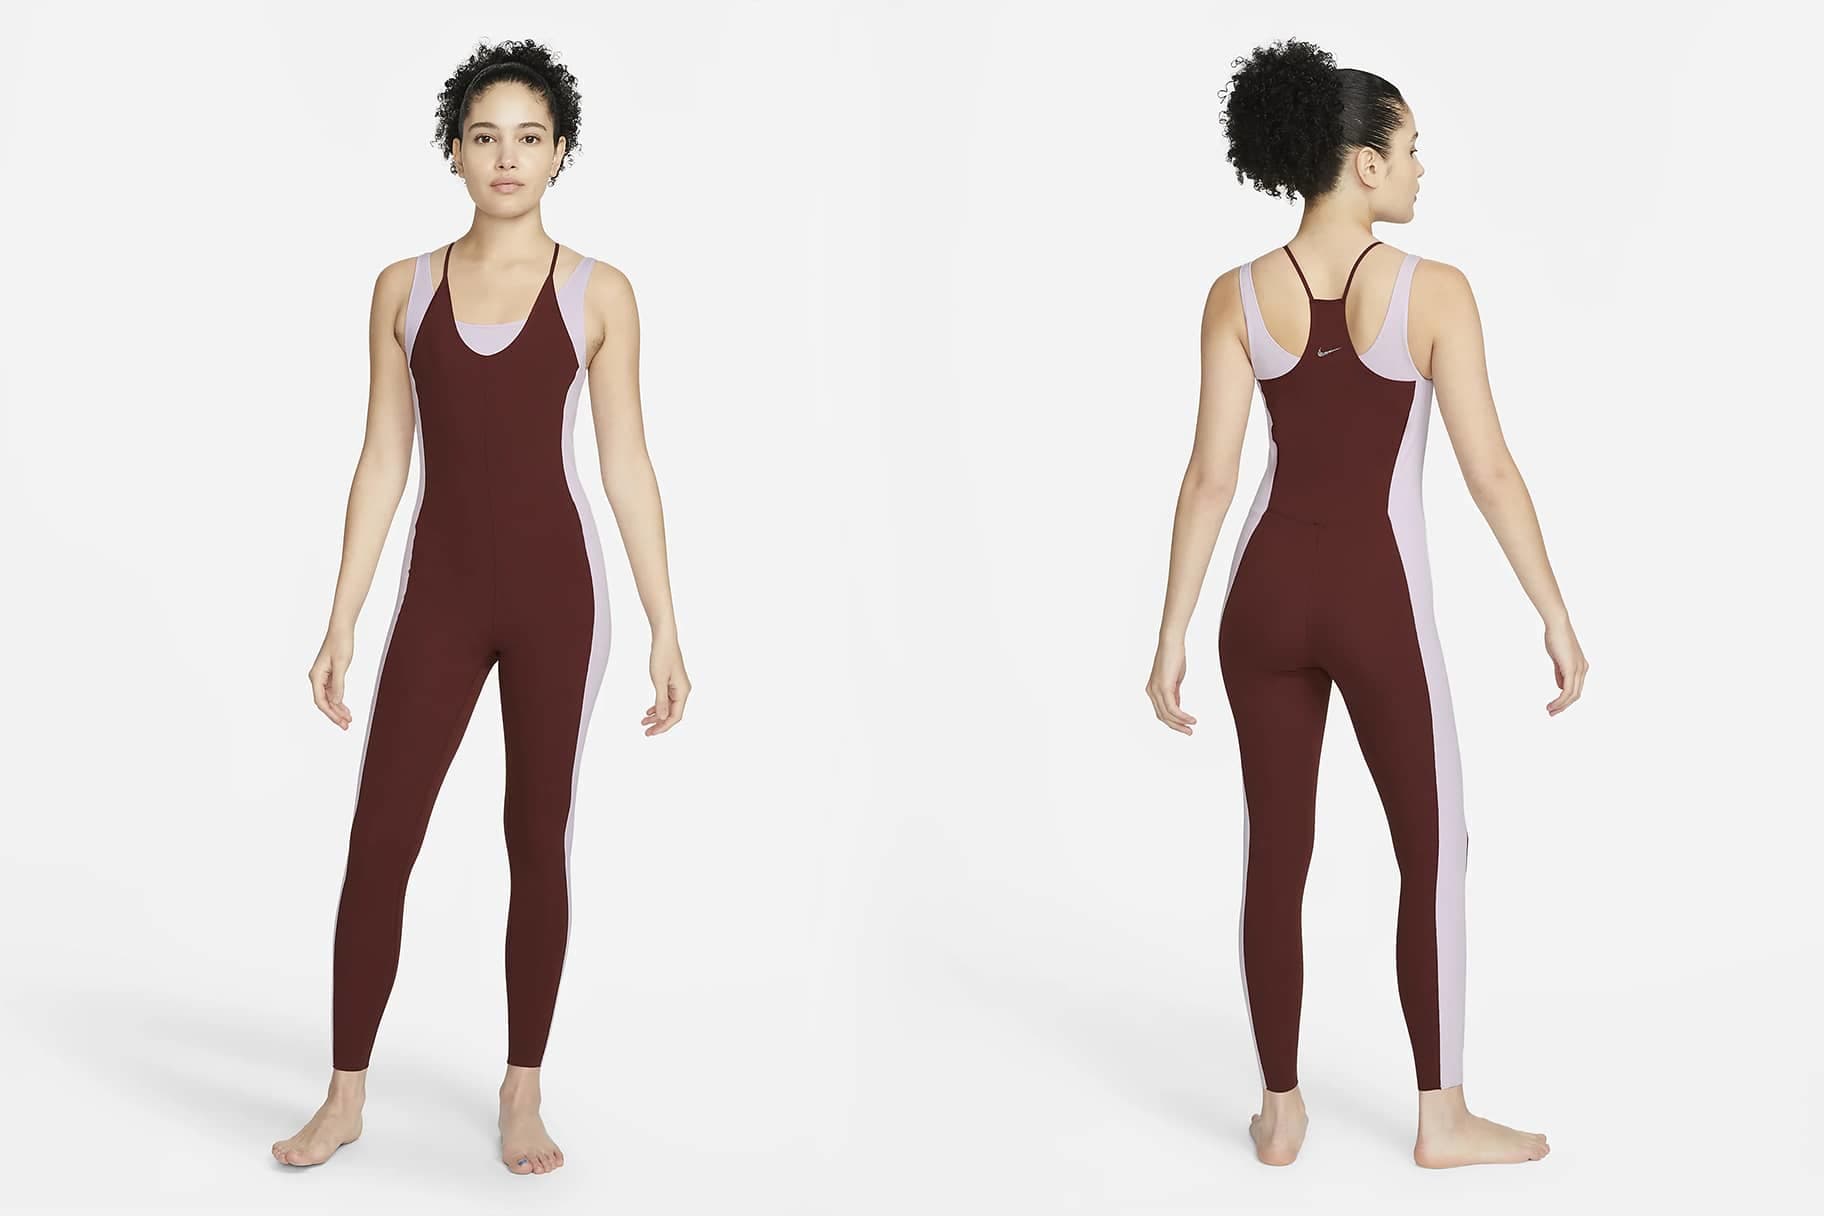 The Best Nike Workout Bodysuits for Women. Nike UK